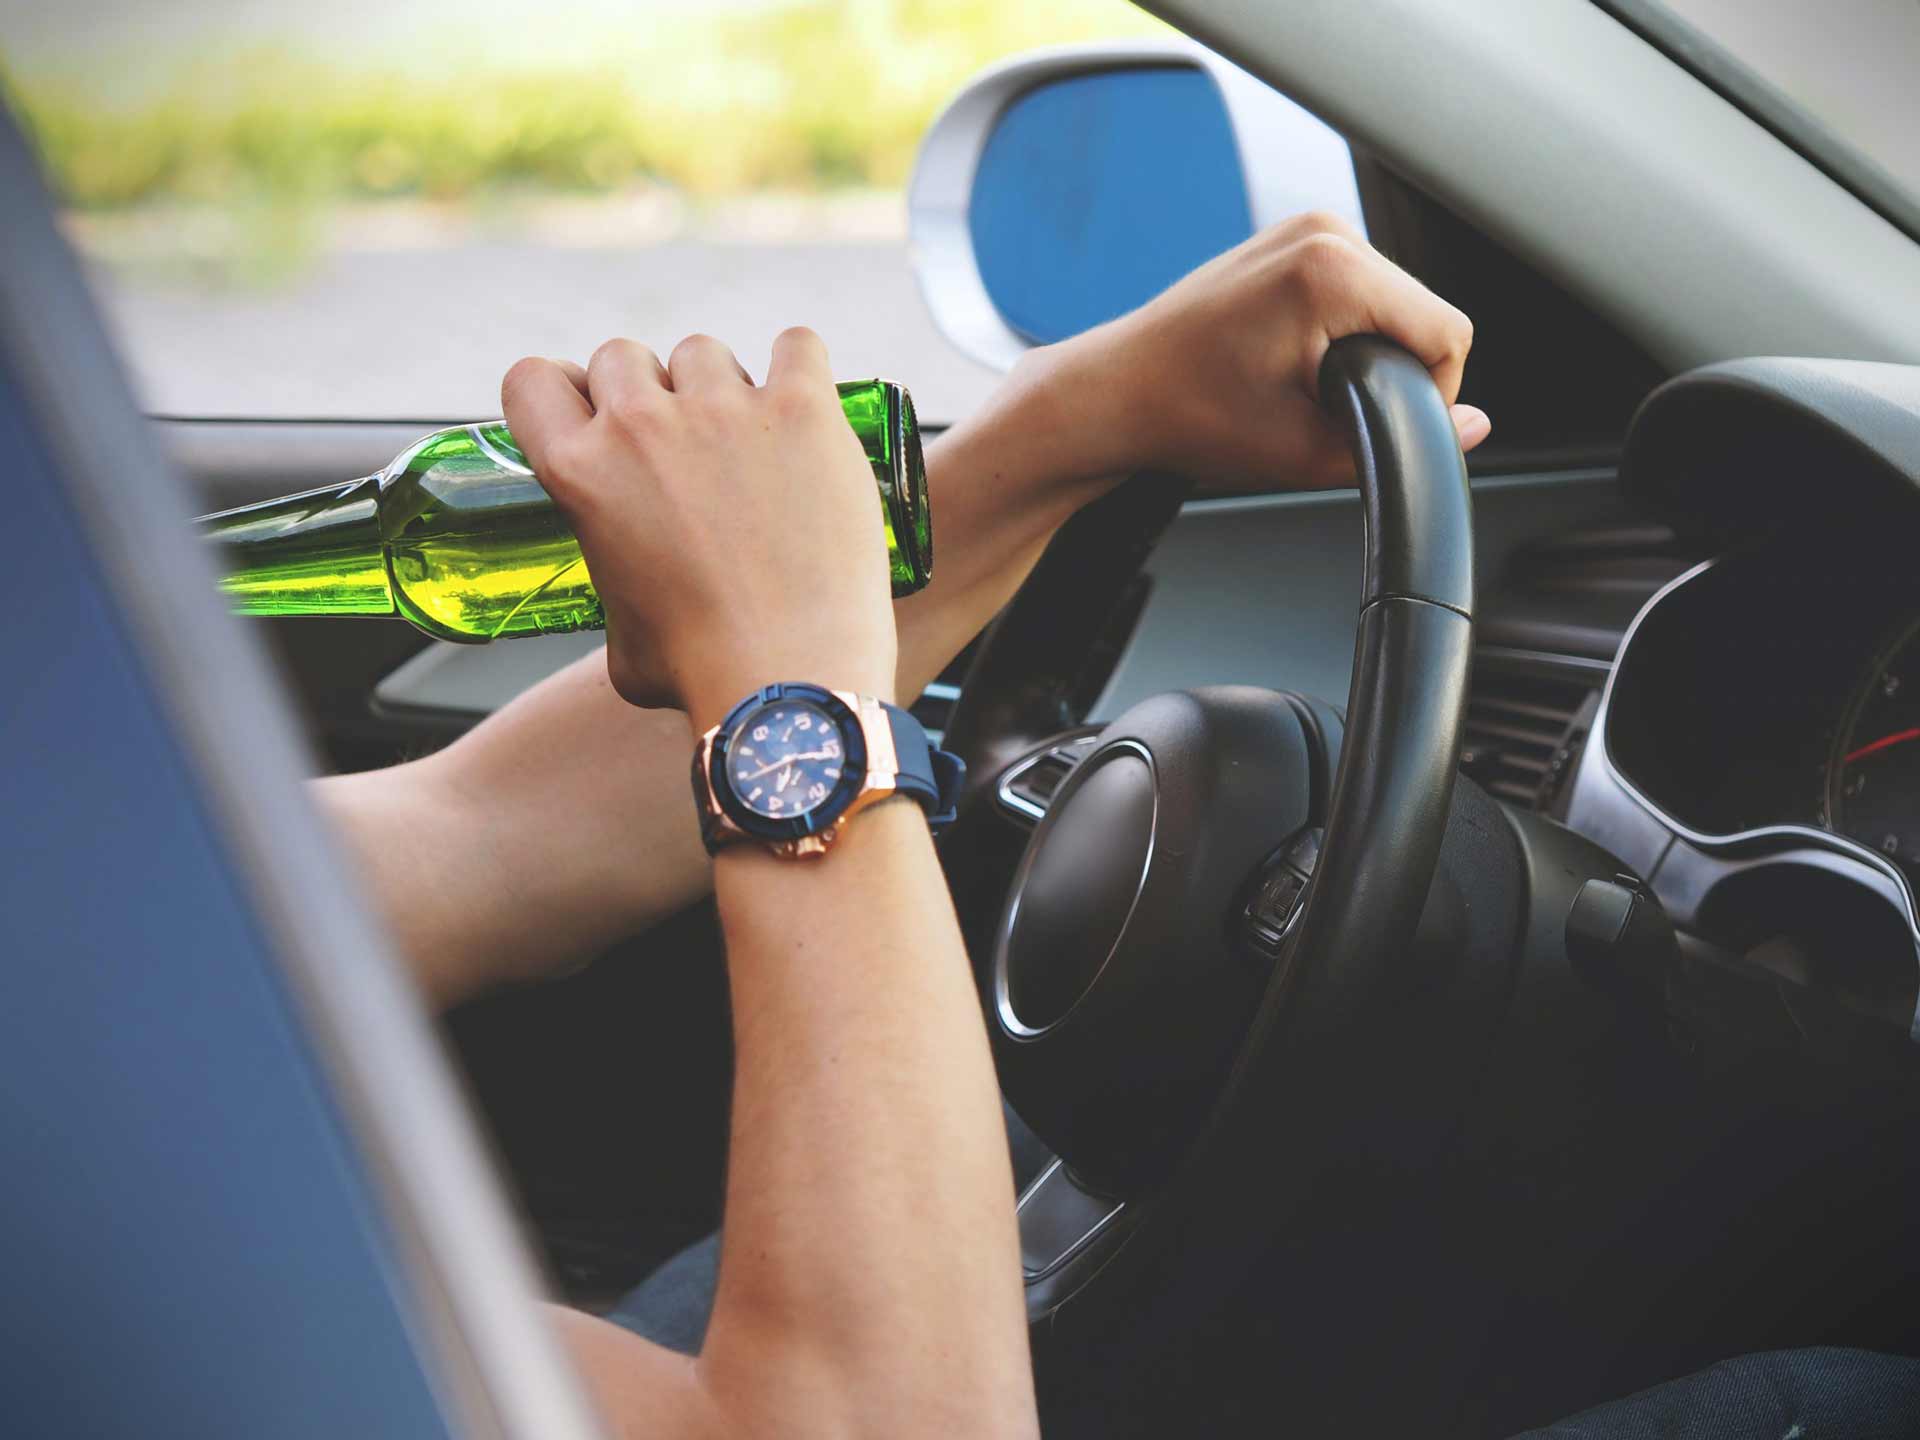 DWI Convictions: How Long After Drinking Can You Drive?